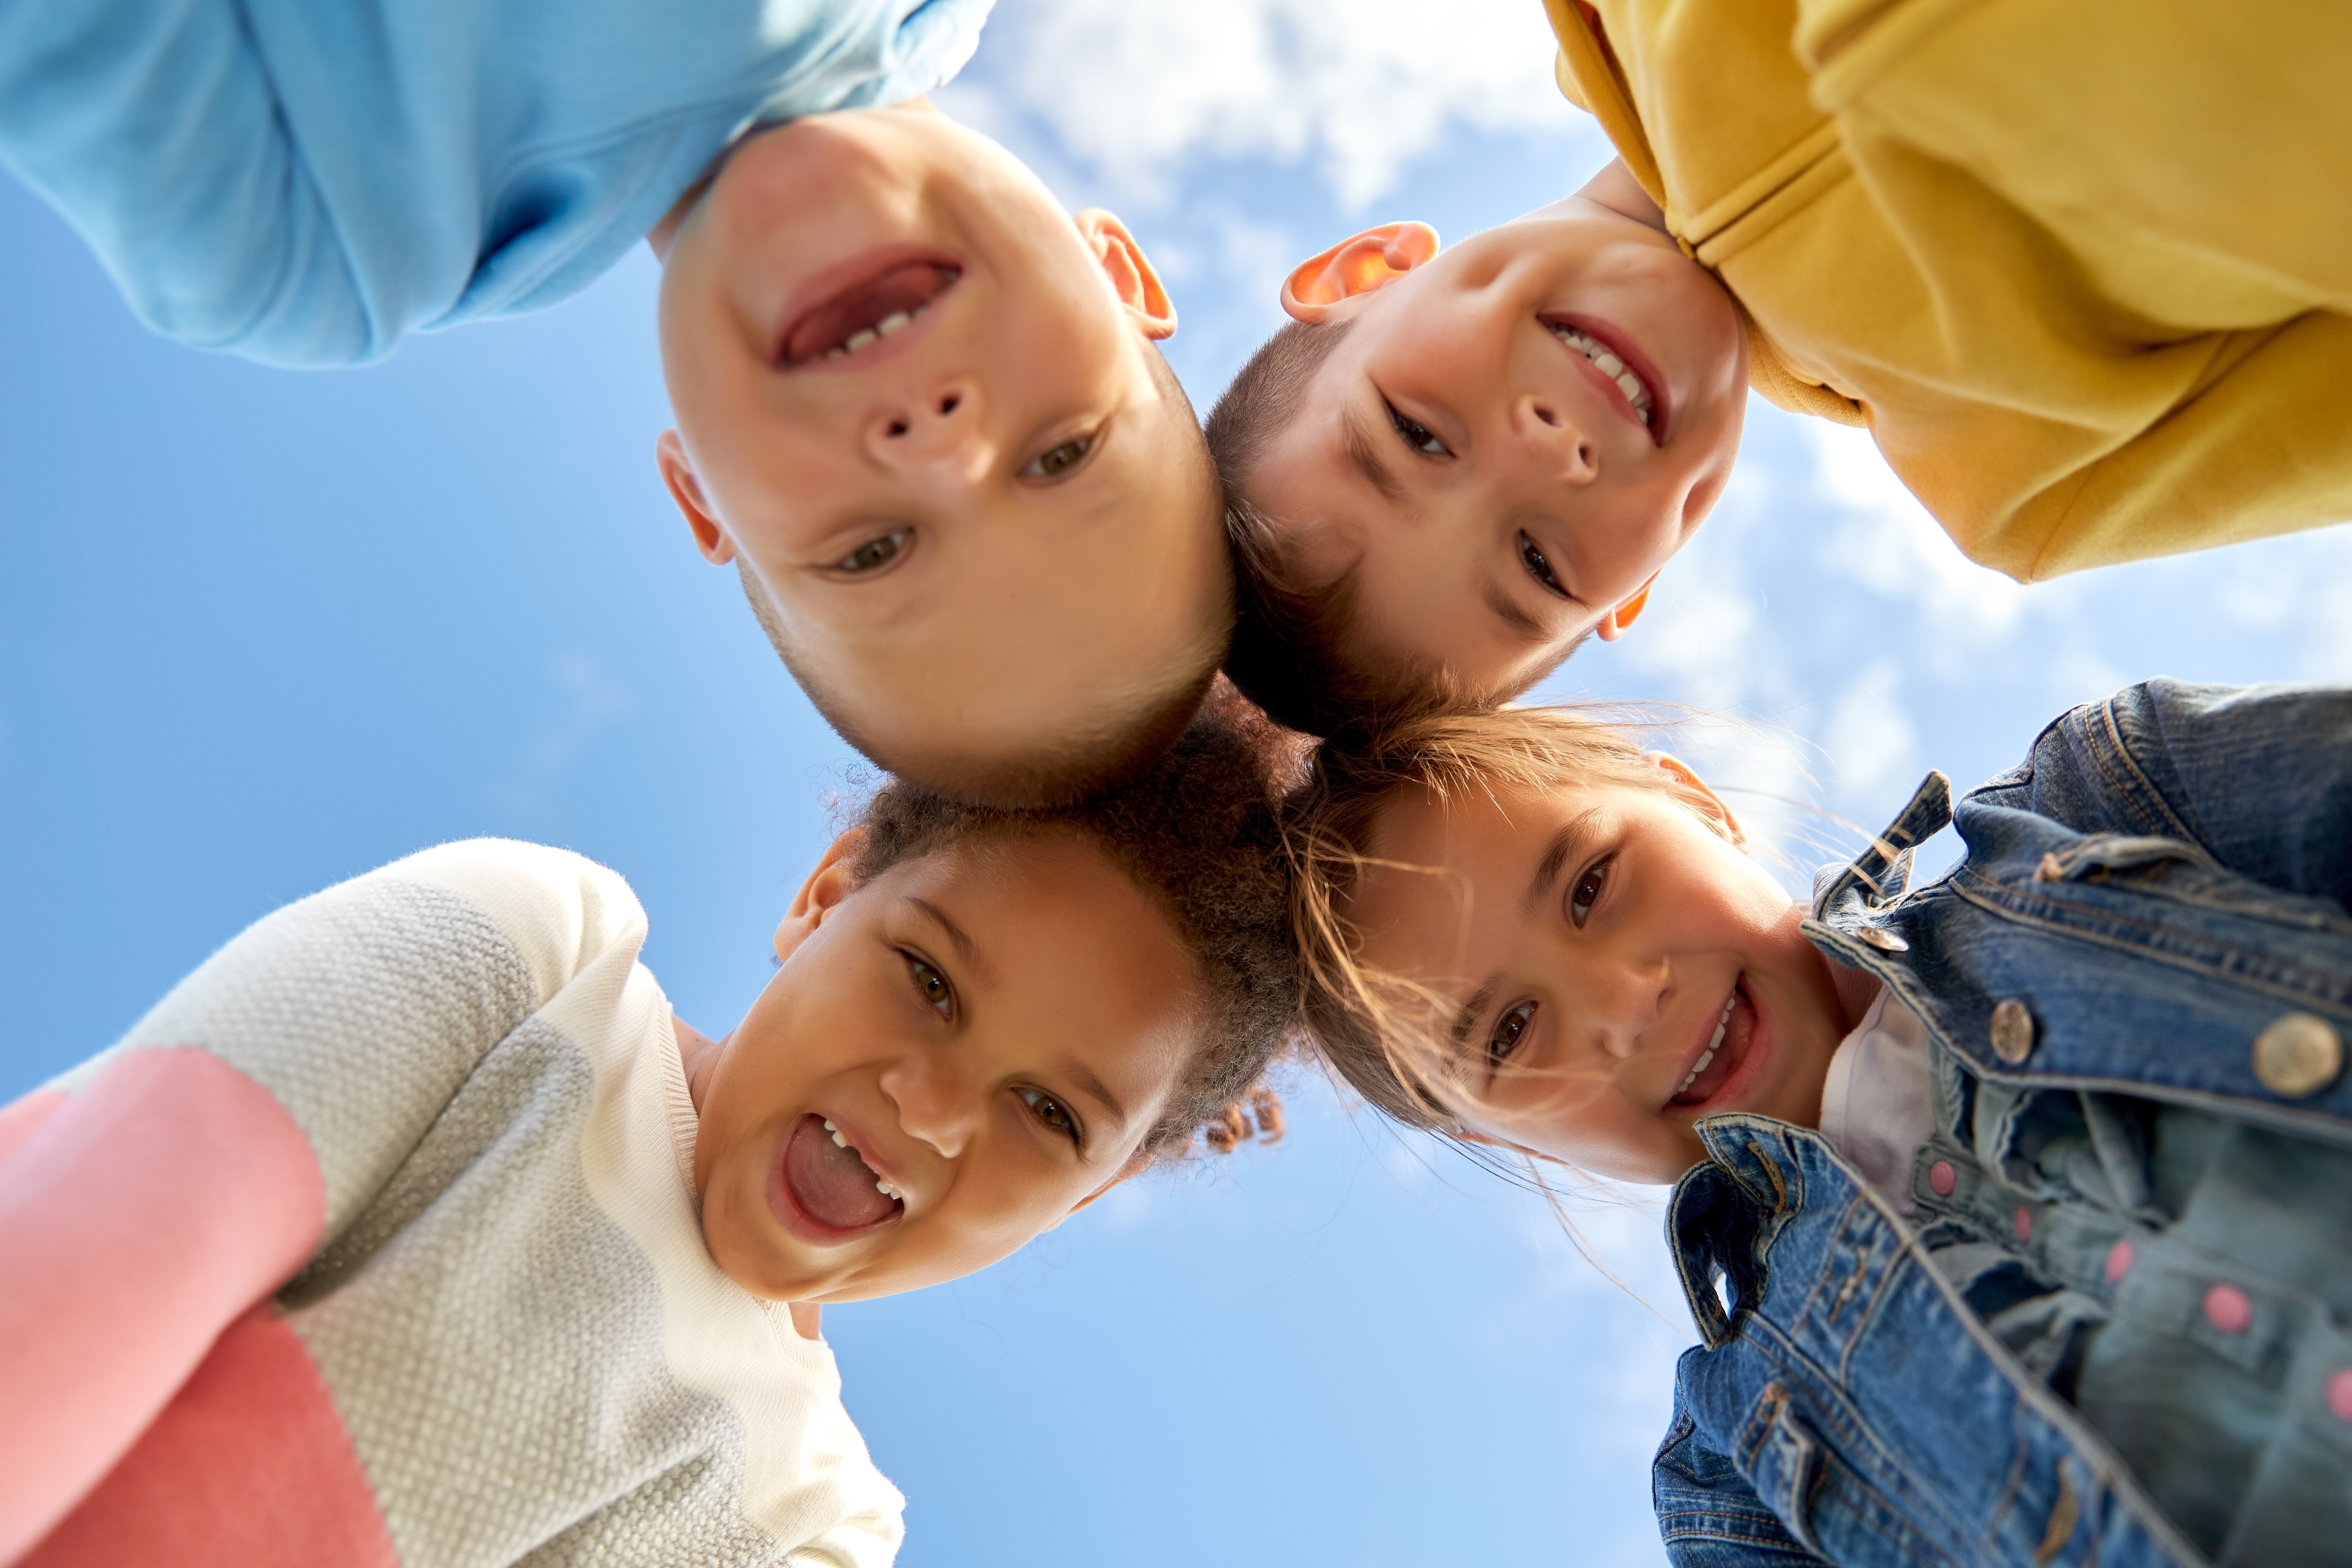 Four kids stare down at the camera against a blue sky